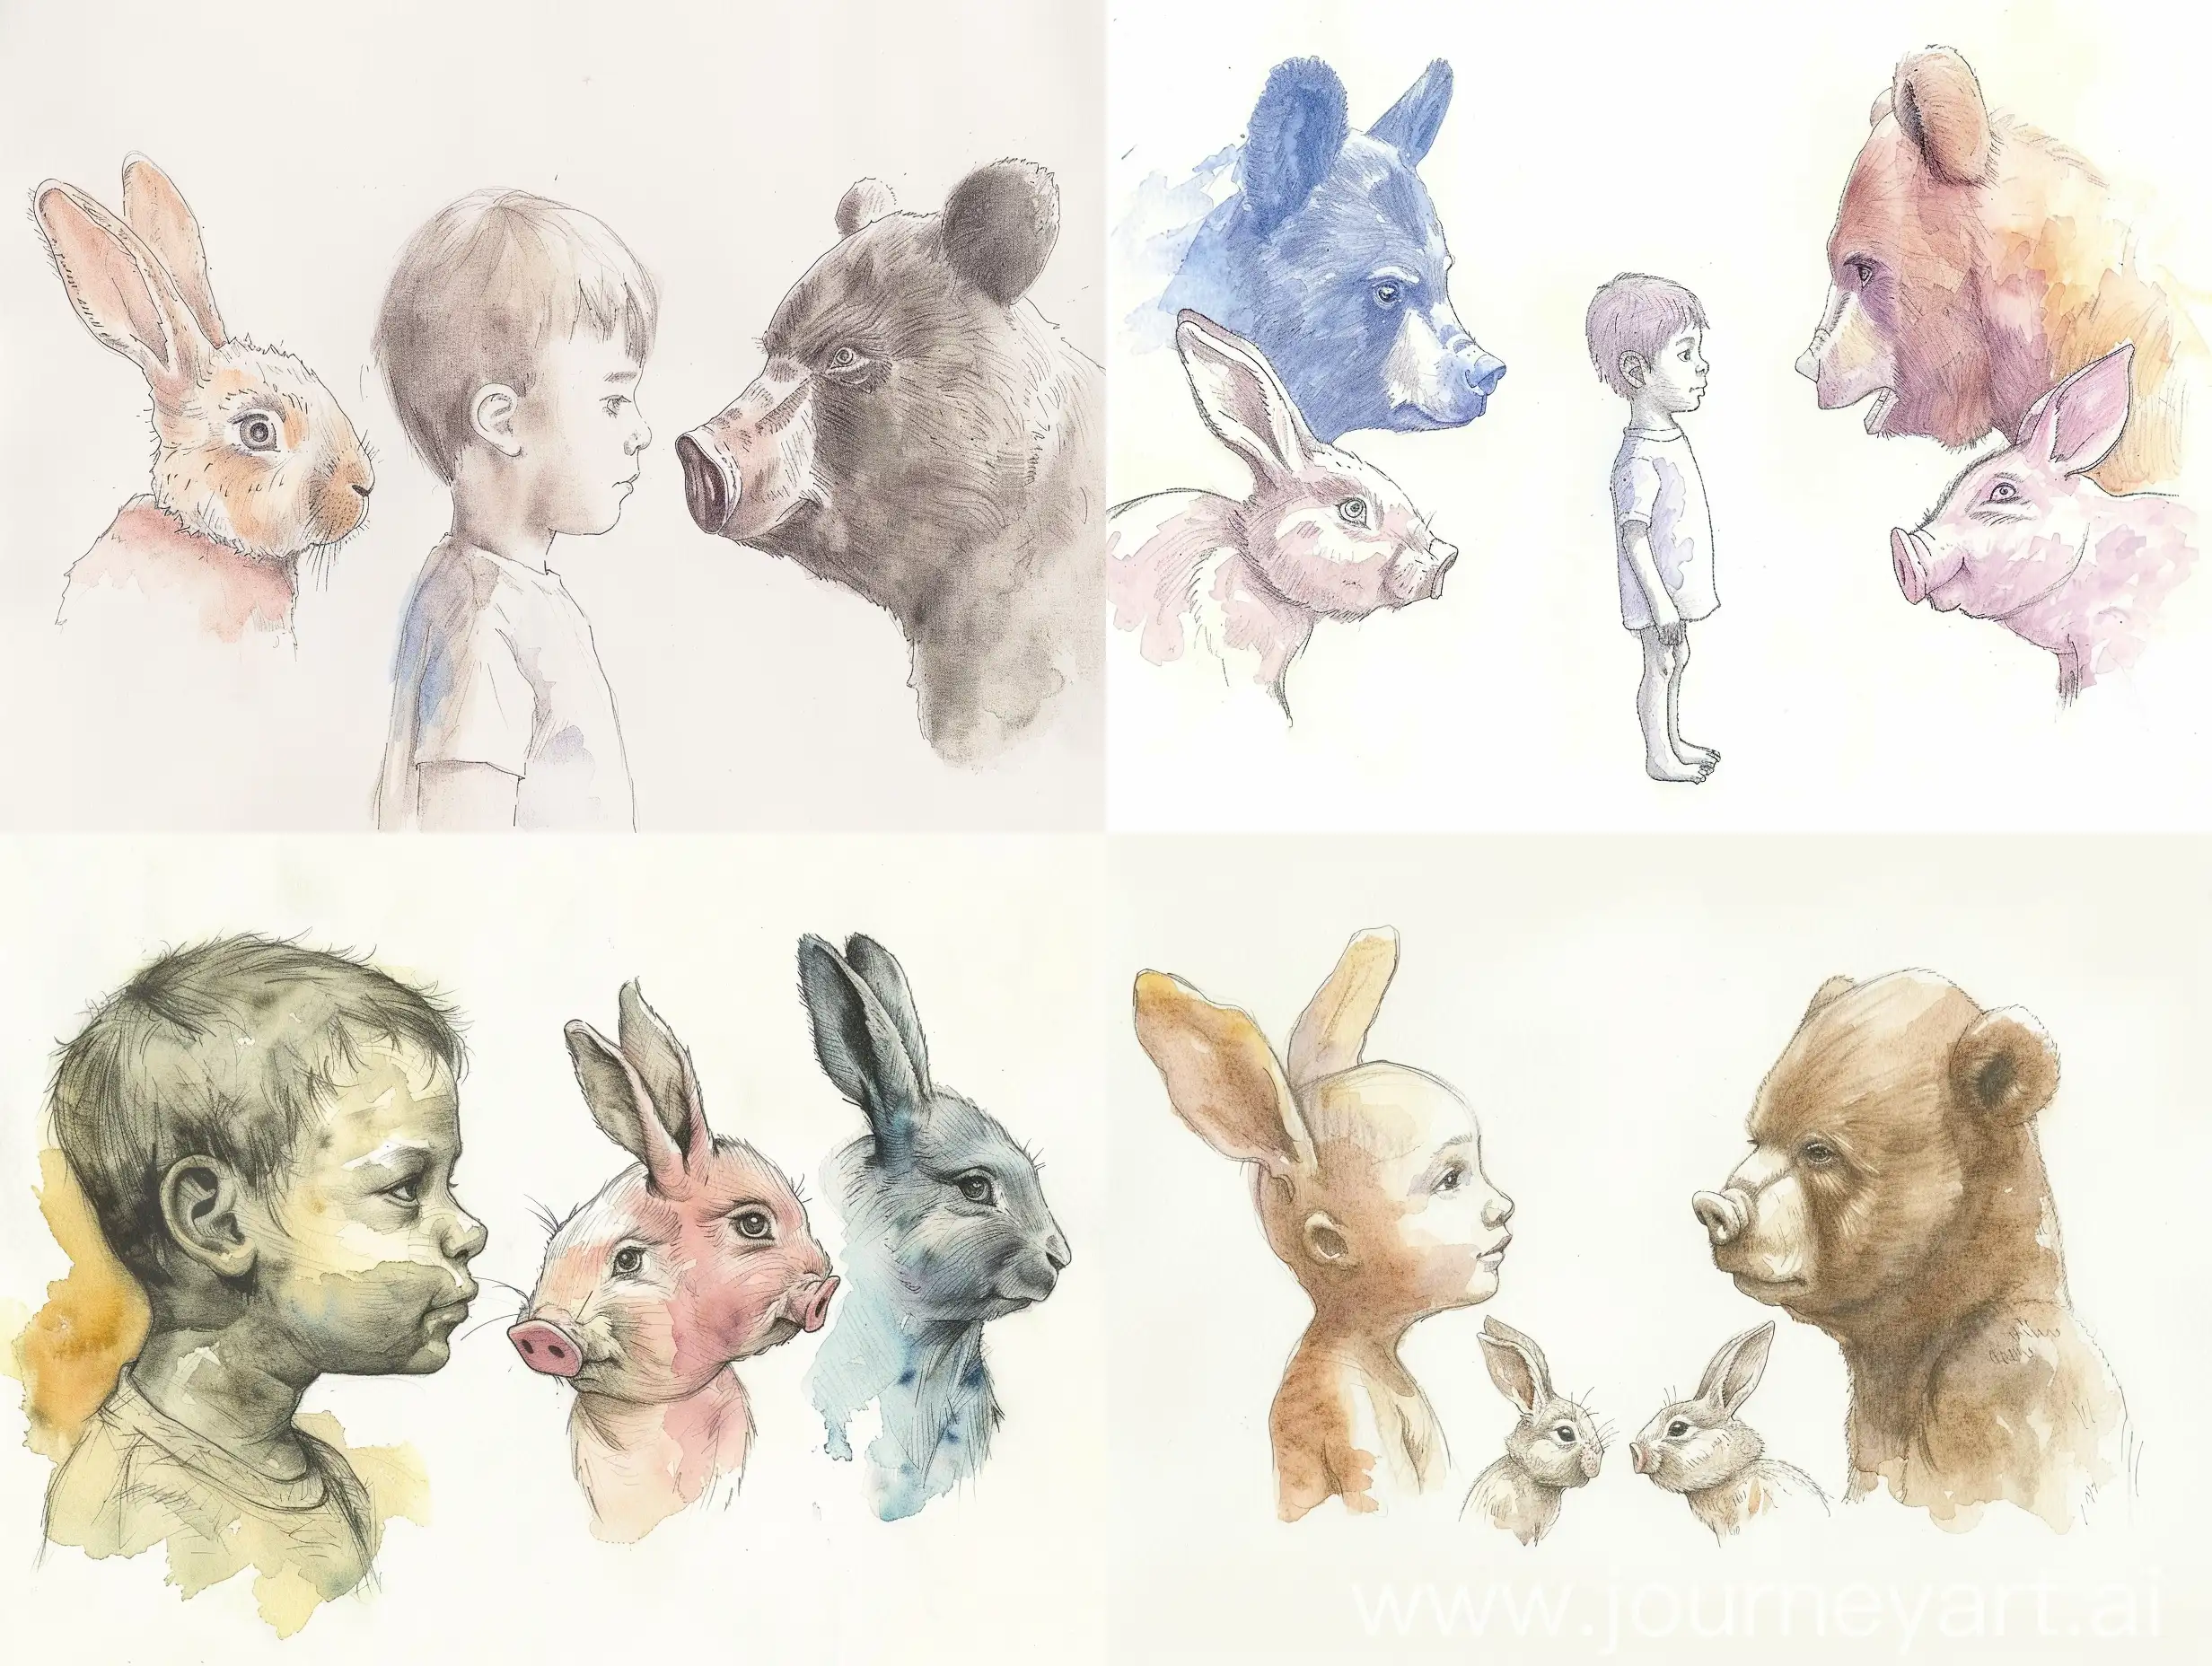 Watercolor image of a child's drawing of a 10-year-old child, faces in profile of a rabbit, bear and piglet are drawn in pencil